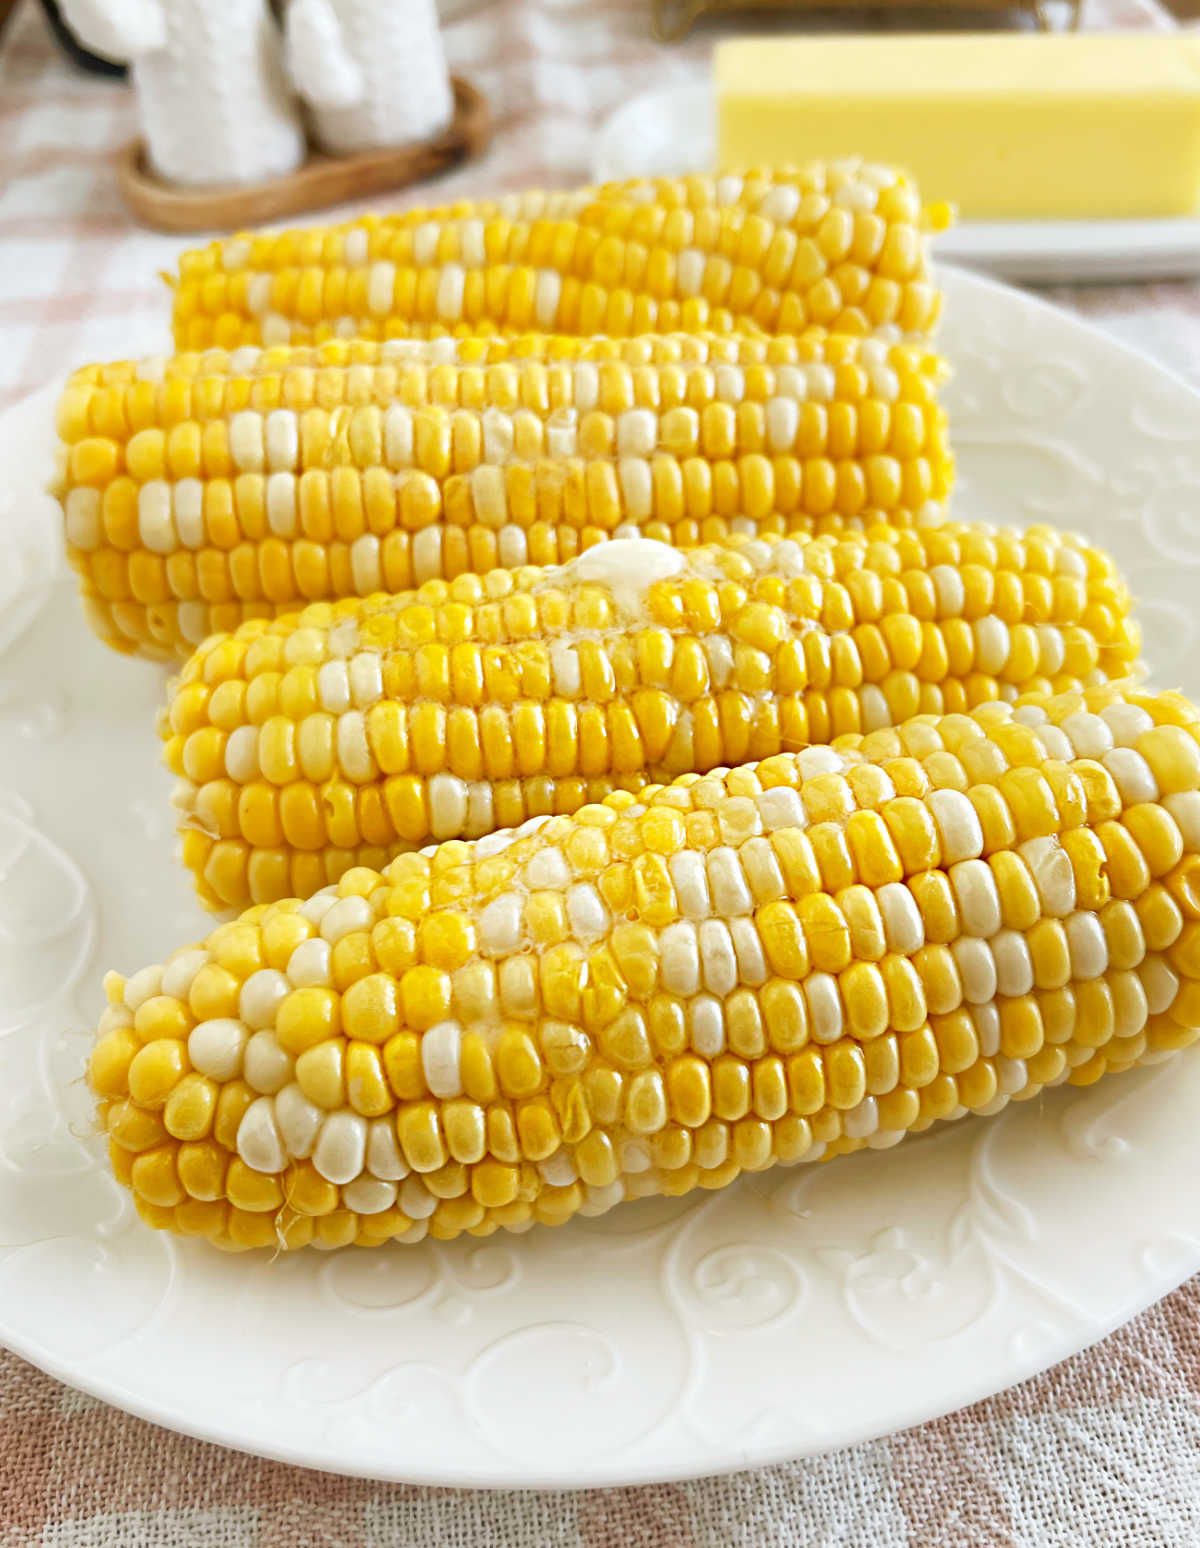 microwave corn on the cob with melted butter on white plate.